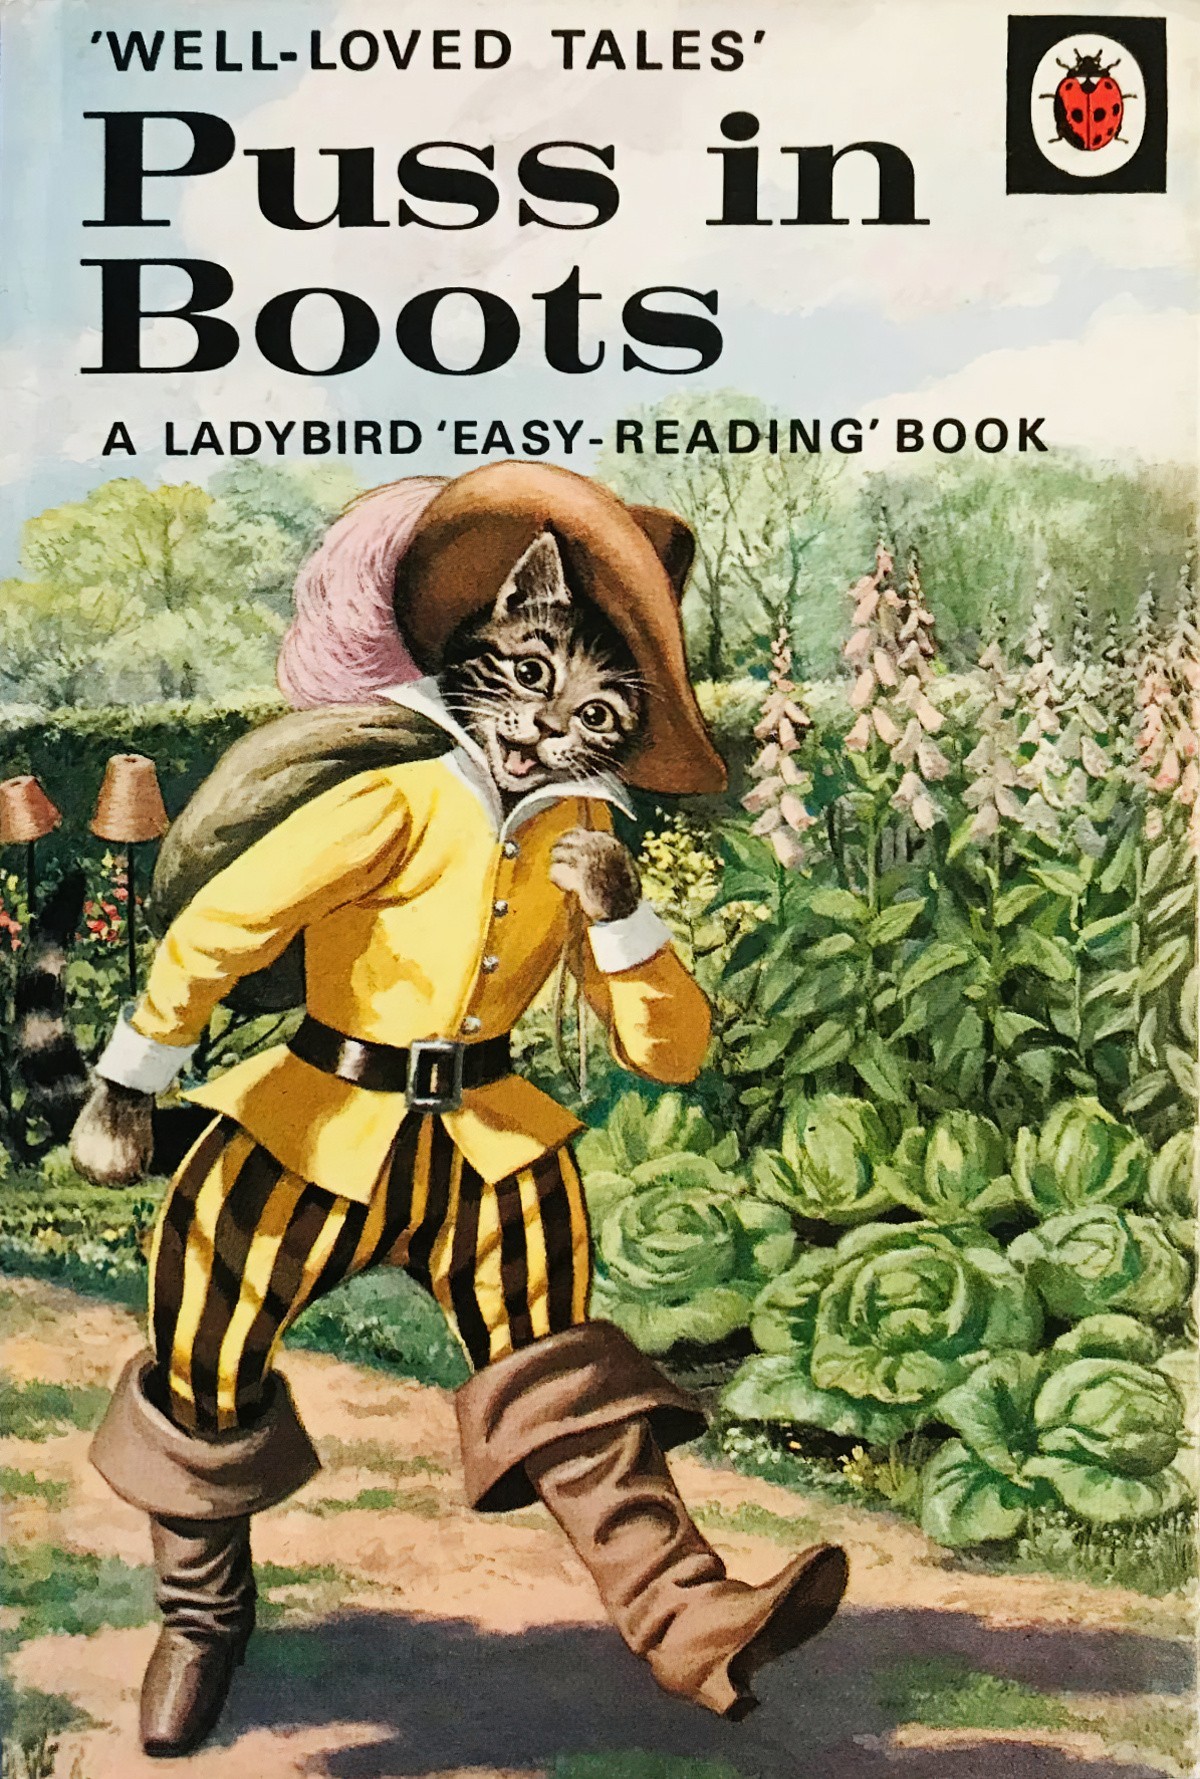 Puss In Boots by Charles Perrault Fairy Tale Analysis